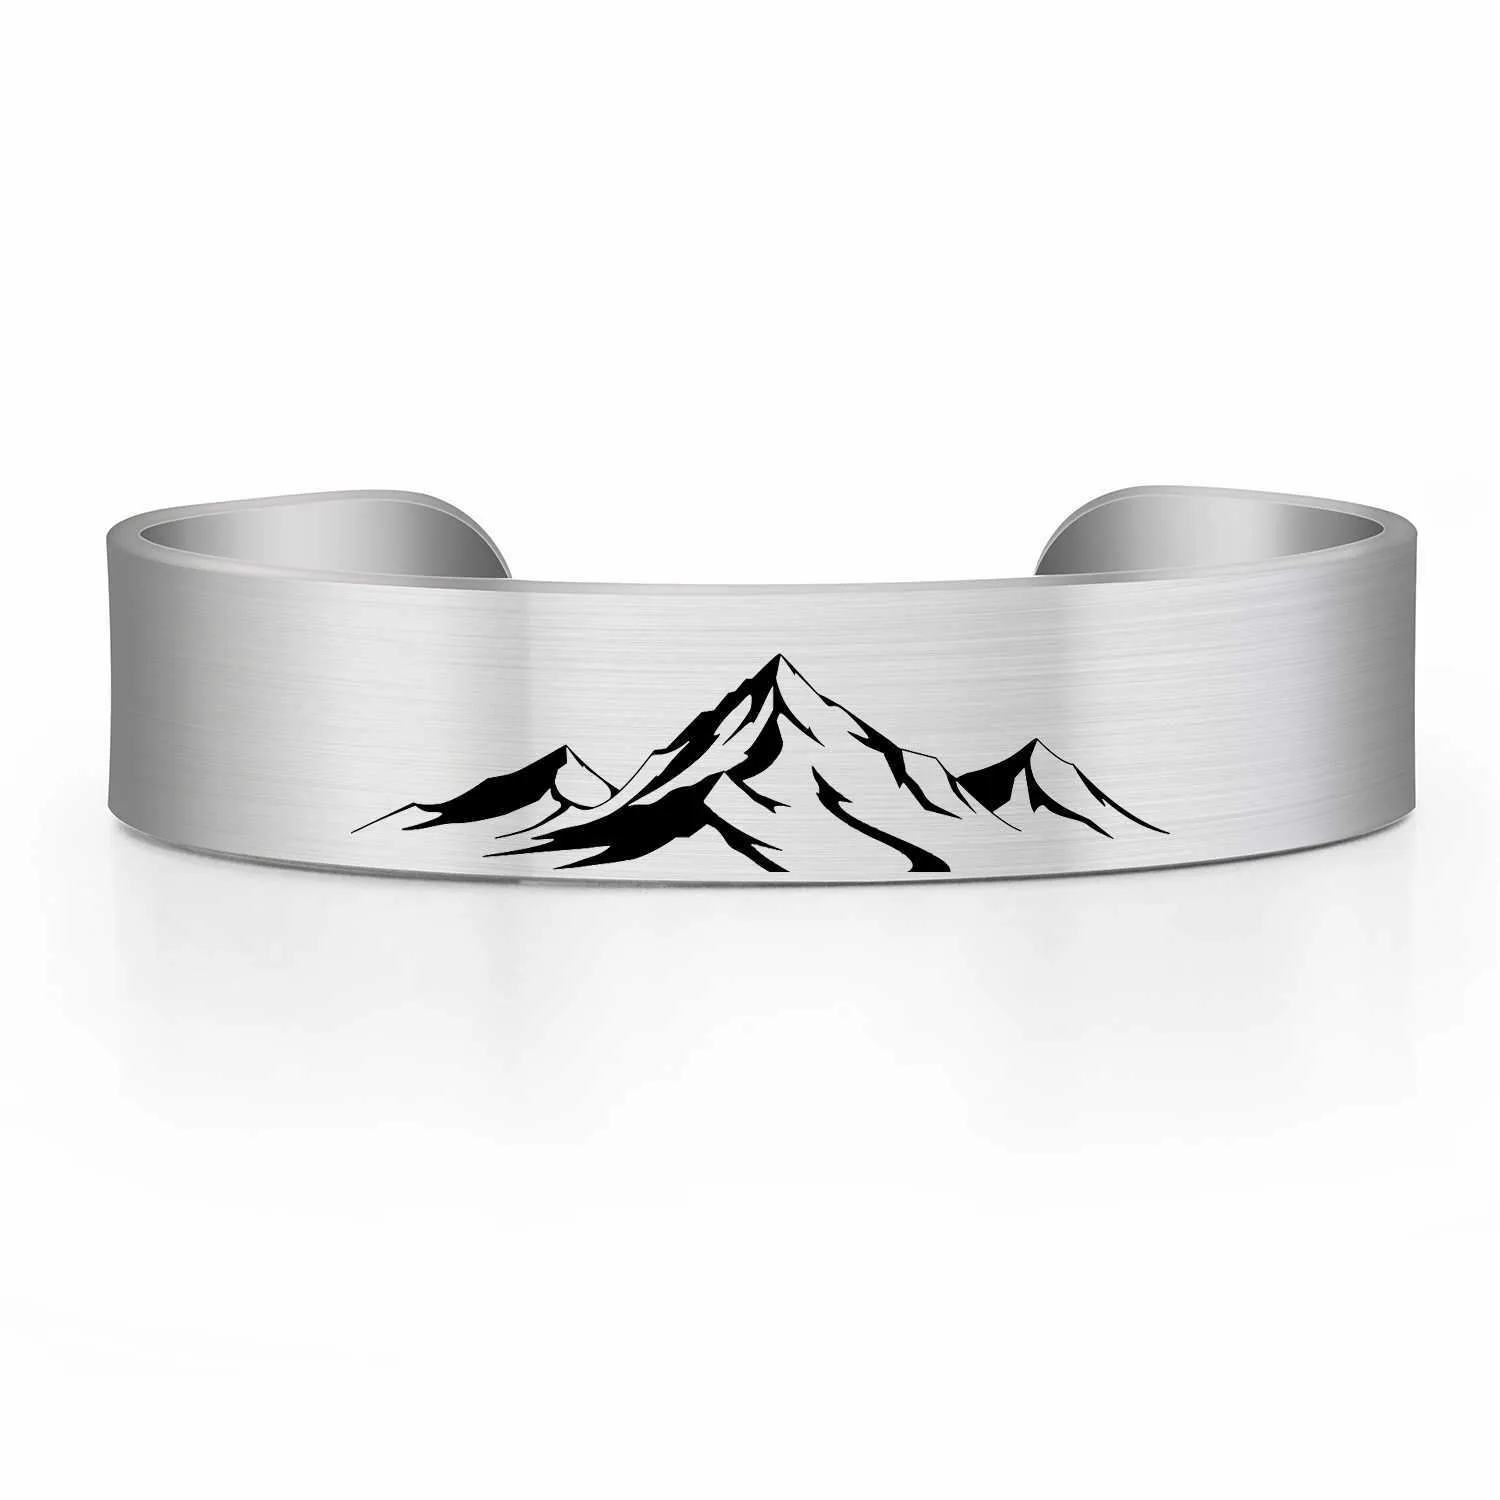 Hill Stainless Steel Brushed Cuff 15mm Width Bangle Bracelet Jewelry Gifts Adjustable Size for Man and Women Q0717